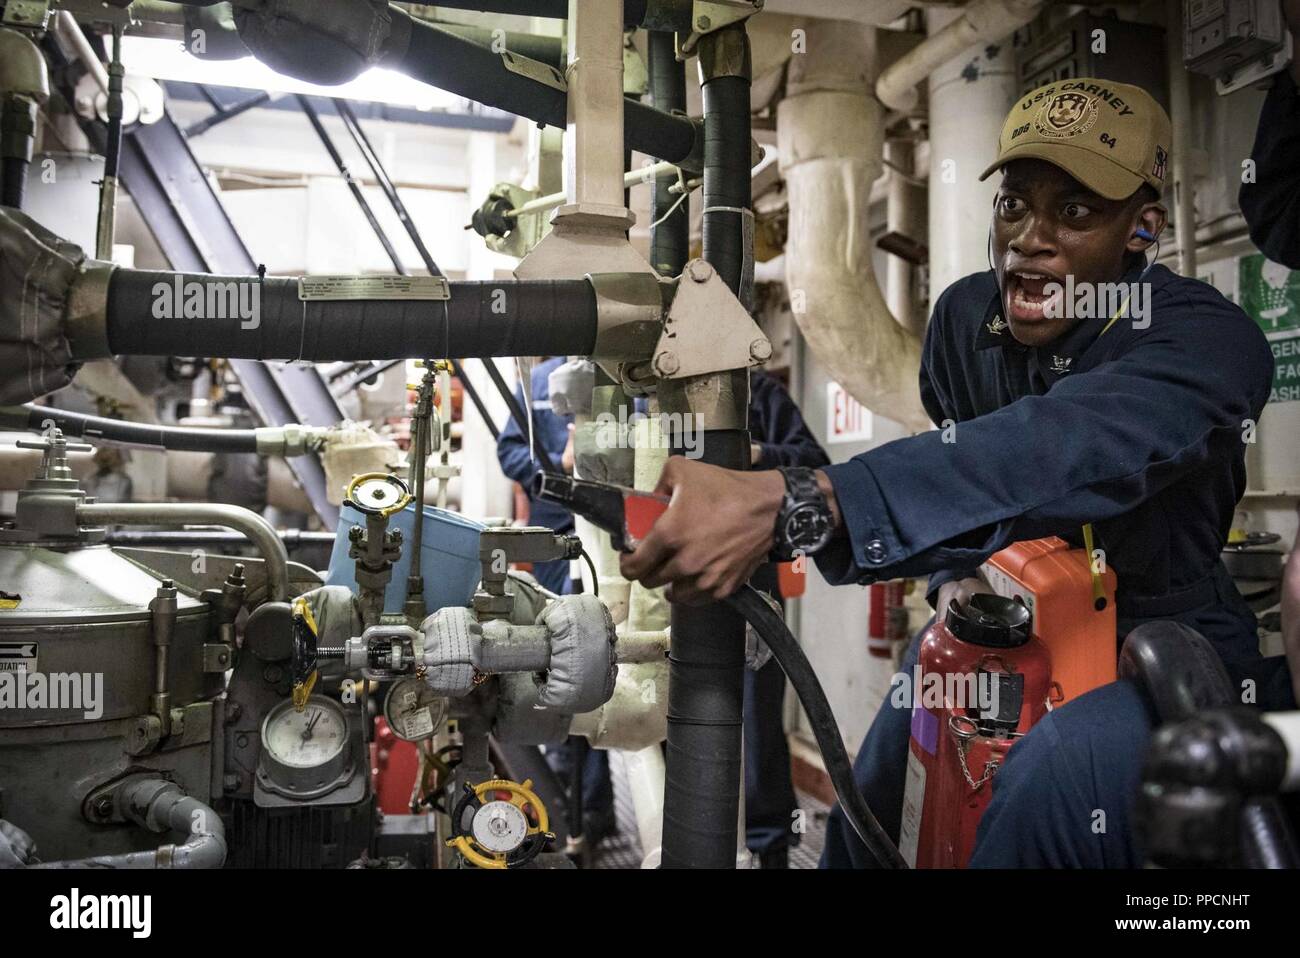 SEA (Aug. 31, 2018) Electrician’s Mate 3rd Class Levon King fights a simulated fire during a general quarters drill aboard the Arleigh Burke-class guided-missile destroyer USS Carney (DDG 64) Aug. 31, 2018. Carney, forward-deployed to Rota, Spain, is on its fifth patrol in the U.S. 6th Fleet area of operations in support of regional allies and partners as well as U.S. national security interests in Europe and Africa. Stock Photo